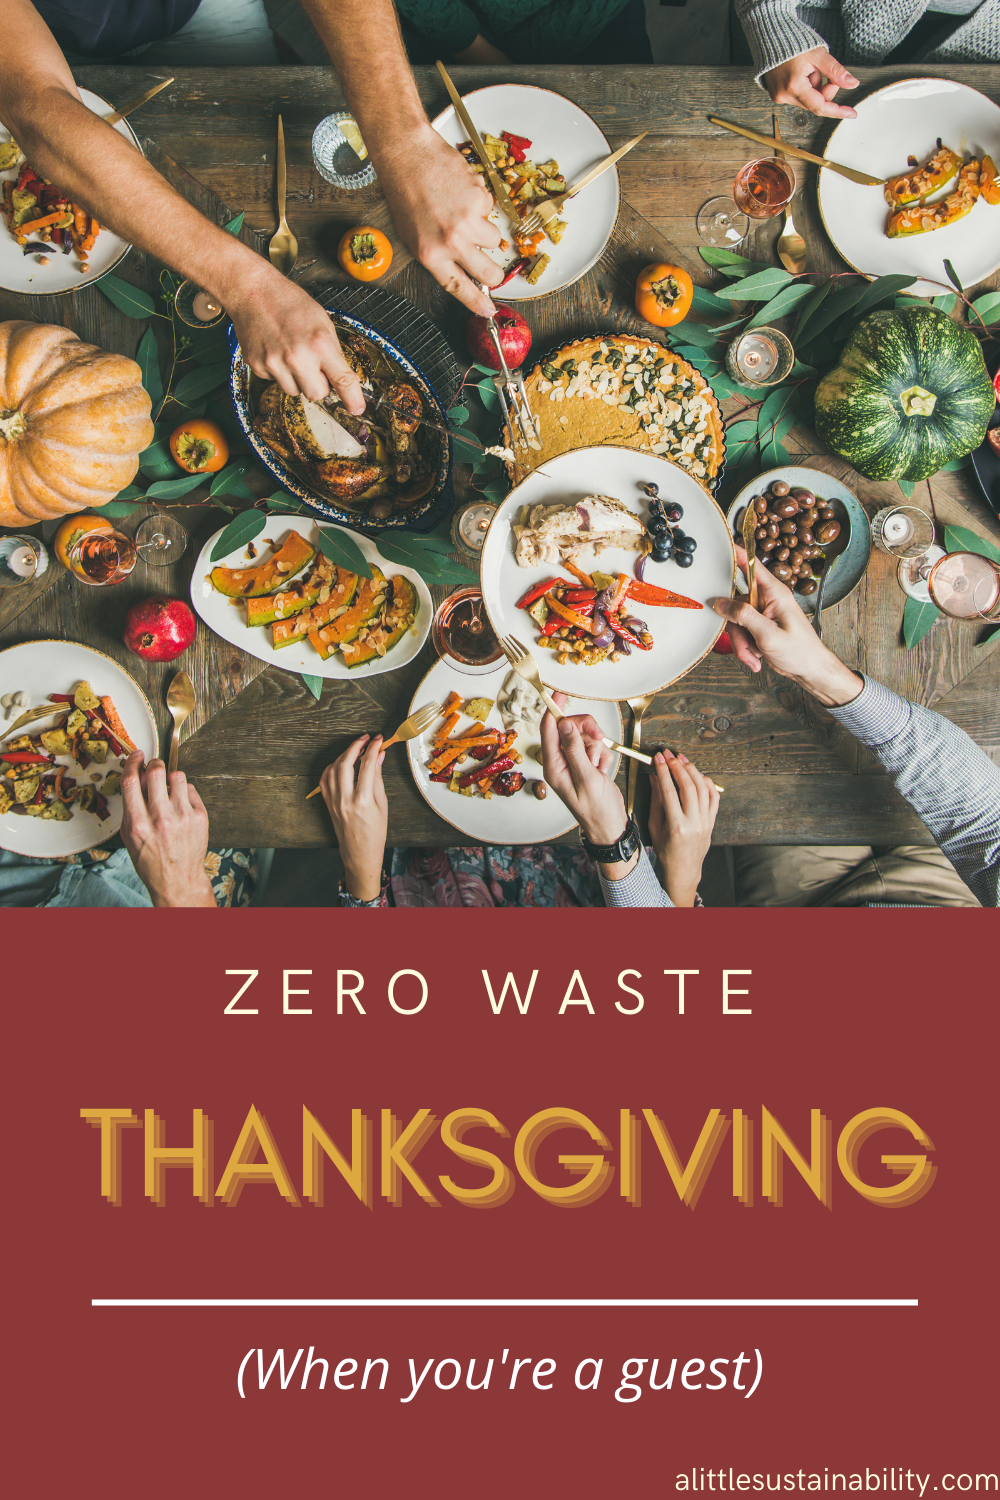 Invited to a Thanksgiving dinner? Here’s how you can stay zero waste while buying a guest at Thanksgiving. 6 eco-friendly ideas for you to try.